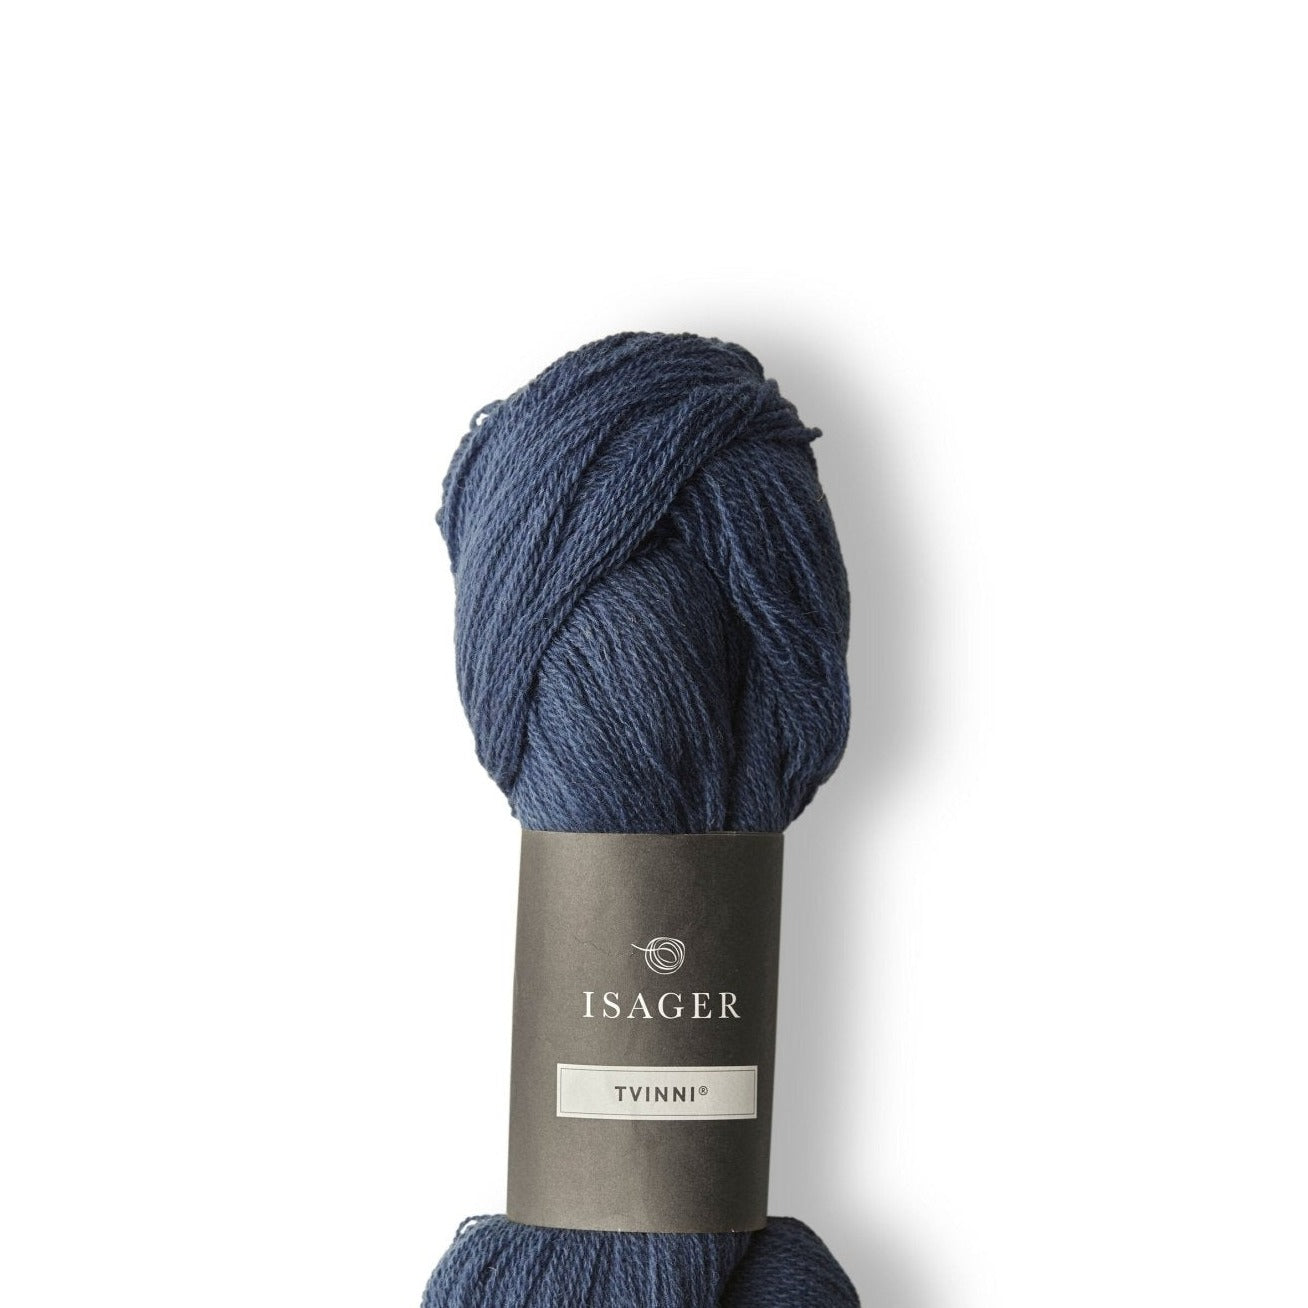 Isager Tvinni - 54 - 4 Ply - Isager - The Little Yarn Store